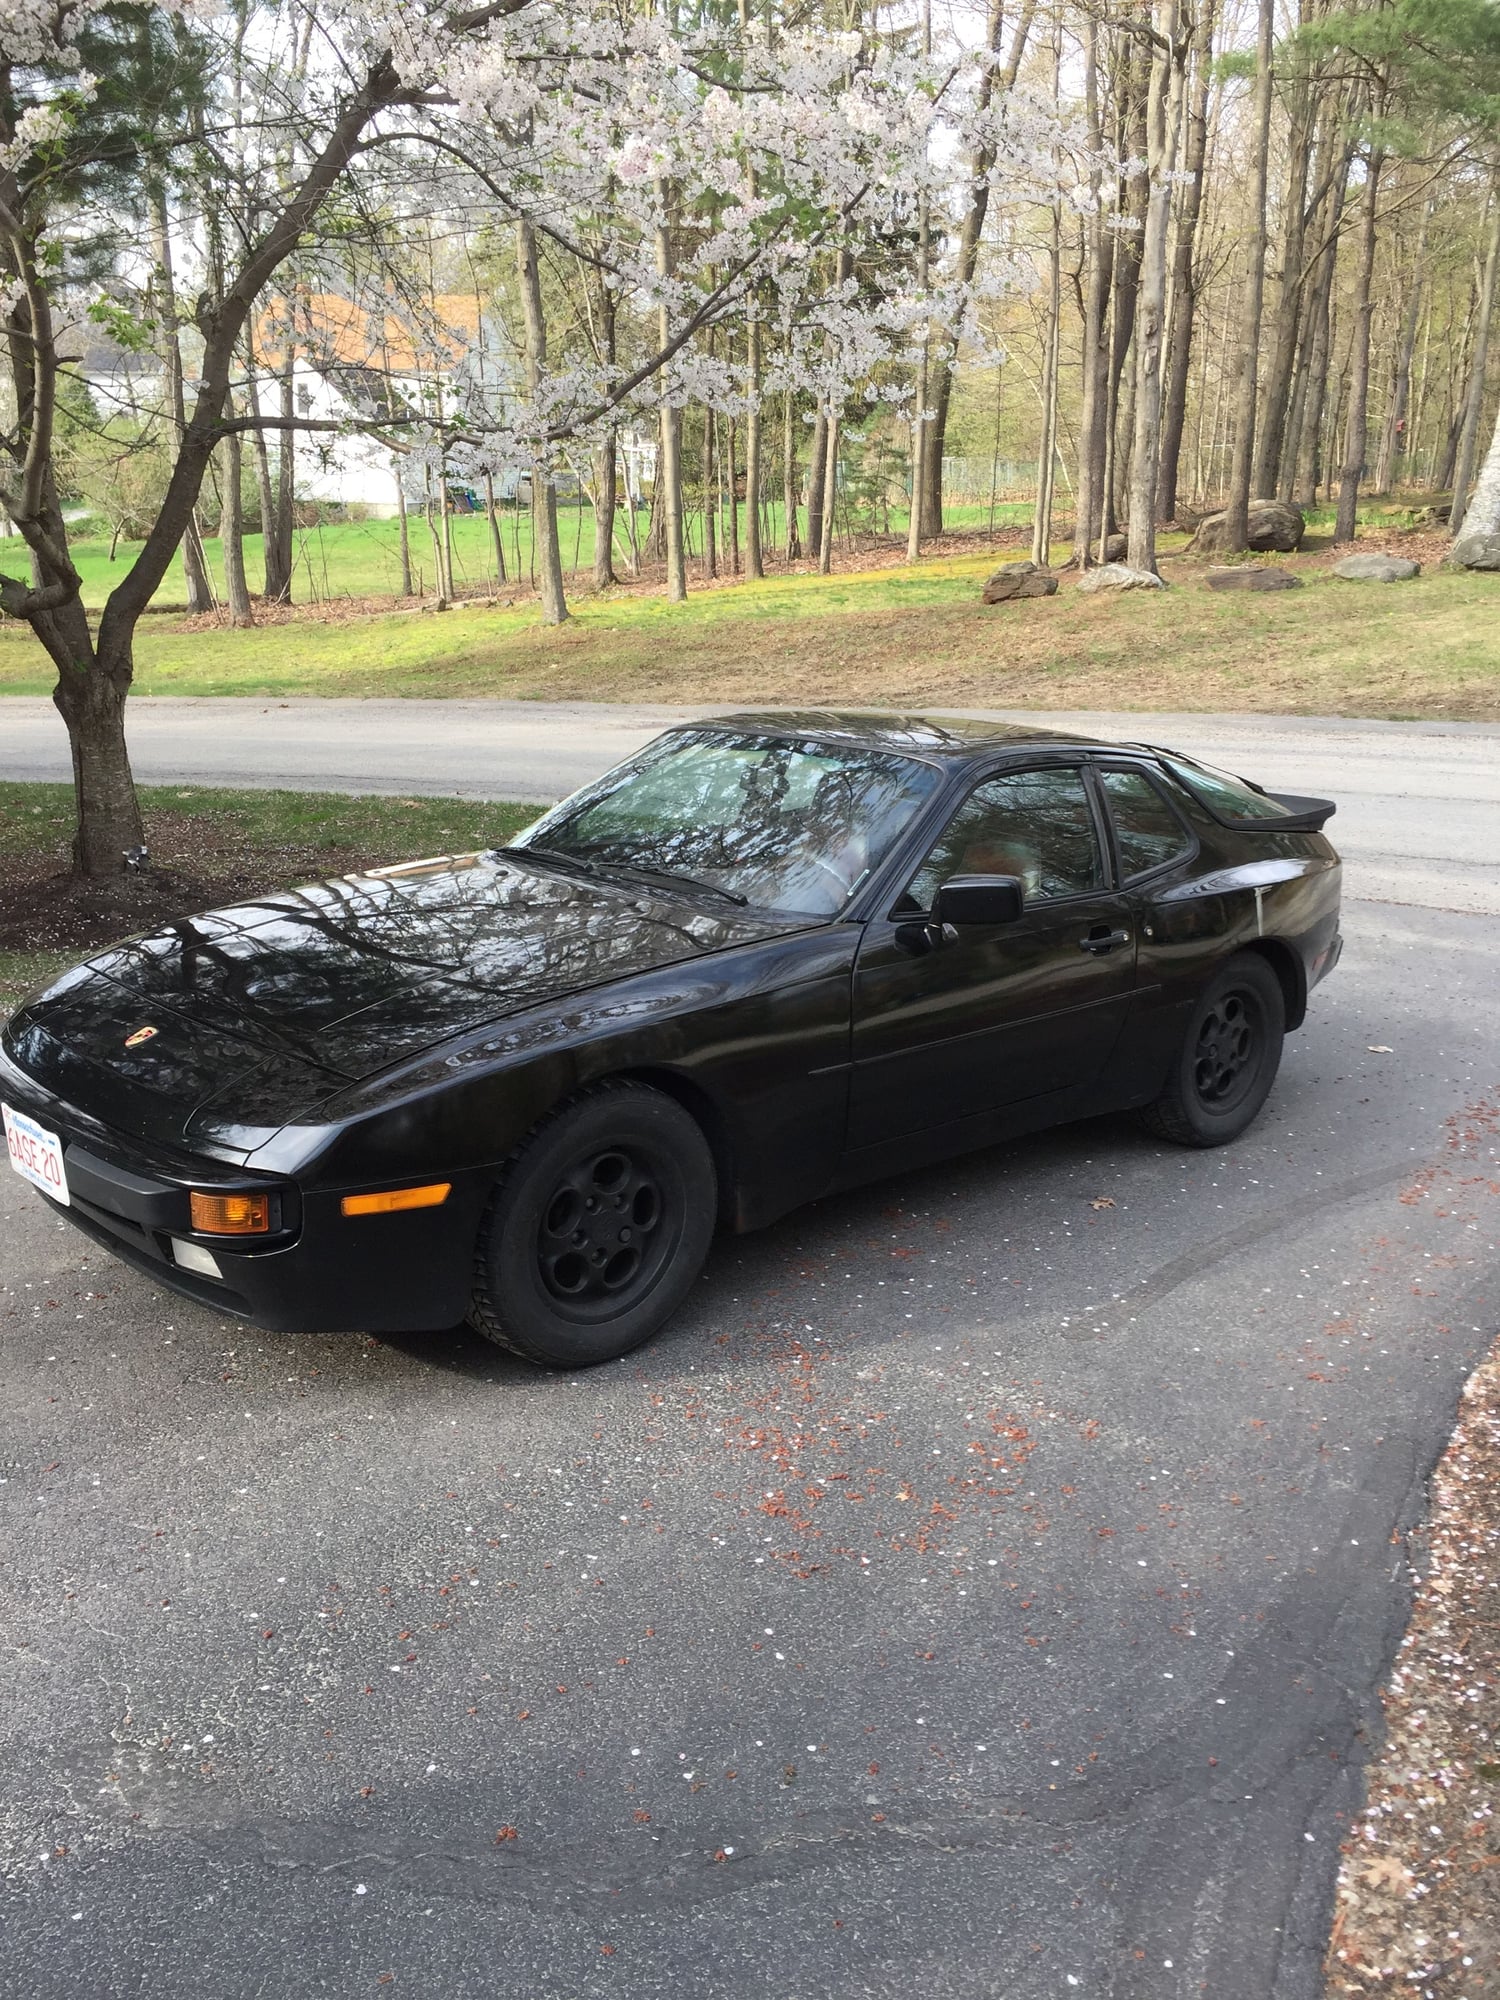 1985 Porsche 944 - 1985.5 Porsche 944 $5,500 OBO - Used - VIN WP0AA0943FN454018 - 115,000 Miles - 4 cyl - 2WD - Manual - Hatchback - Black - Sterling, MA 01564, United States